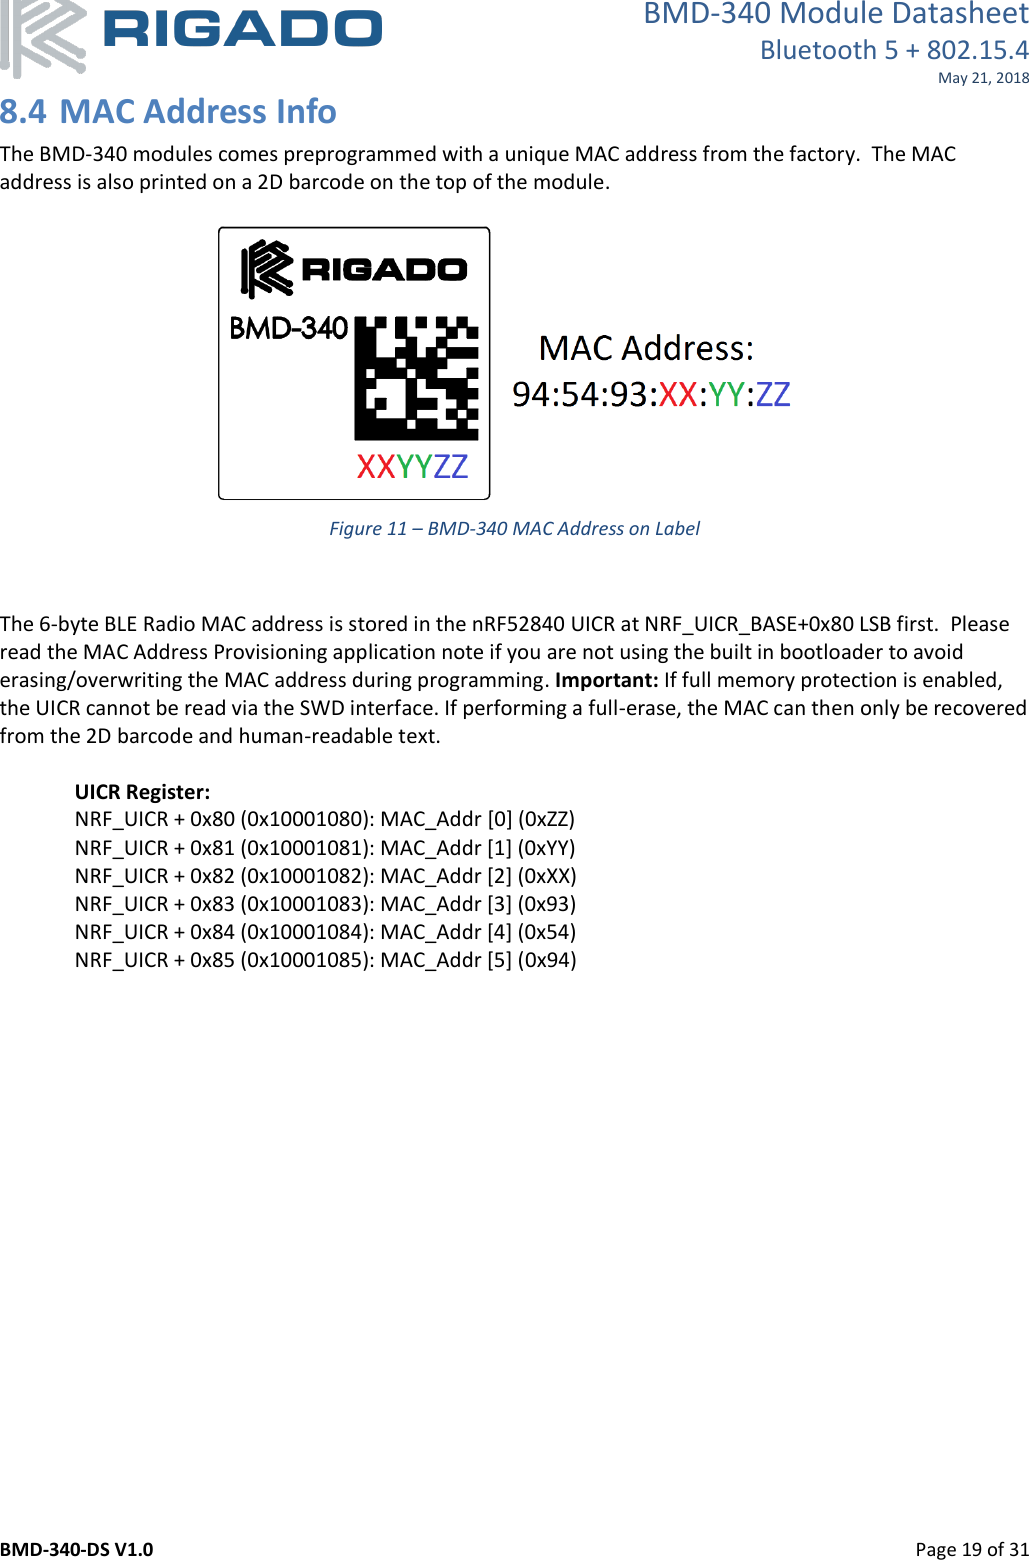 BMD-340 Module Datasheet Bluetooth 5 + 802.15.4 May 21, 2018 BMD-340-DS V1.0         Page 19 of 31 8.4 MAC Address Info The BMD-340 modules comes preprogrammed with a unique MAC address from the factory.  The MAC address is also printed on a 2D barcode on the top of the module.    Figure 11 – BMD-340 MAC Address on Label   The 6-byte BLE Radio MAC address is stored in the nRF52840 UICR at NRF_UICR_BASE+0x80 LSB first.  Please read the MAC Address Provisioning application note if you are not using the built in bootloader to avoid erasing/overwriting the MAC address during programming. Important: If full memory protection is enabled, the UICR cannot be read via the SWD interface. If performing a full-erase, the MAC can then only be recovered from the 2D barcode and human-readable text.   UICR Register: NRF_UICR + 0x80 (0x10001080): MAC_Addr [0] (0xZZ) NRF_UICR + 0x81 (0x10001081): MAC_Addr [1] (0xYY) NRF_UICR + 0x82 (0x10001082): MAC_Addr [2] (0xXX) NRF_UICR + 0x83 (0x10001083): MAC_Addr [3] (0x93) NRF_UICR + 0x84 (0x10001084): MAC_Addr [4] (0x54) NRF_UICR + 0x85 (0x10001085): MAC_Addr [5] (0x94)    